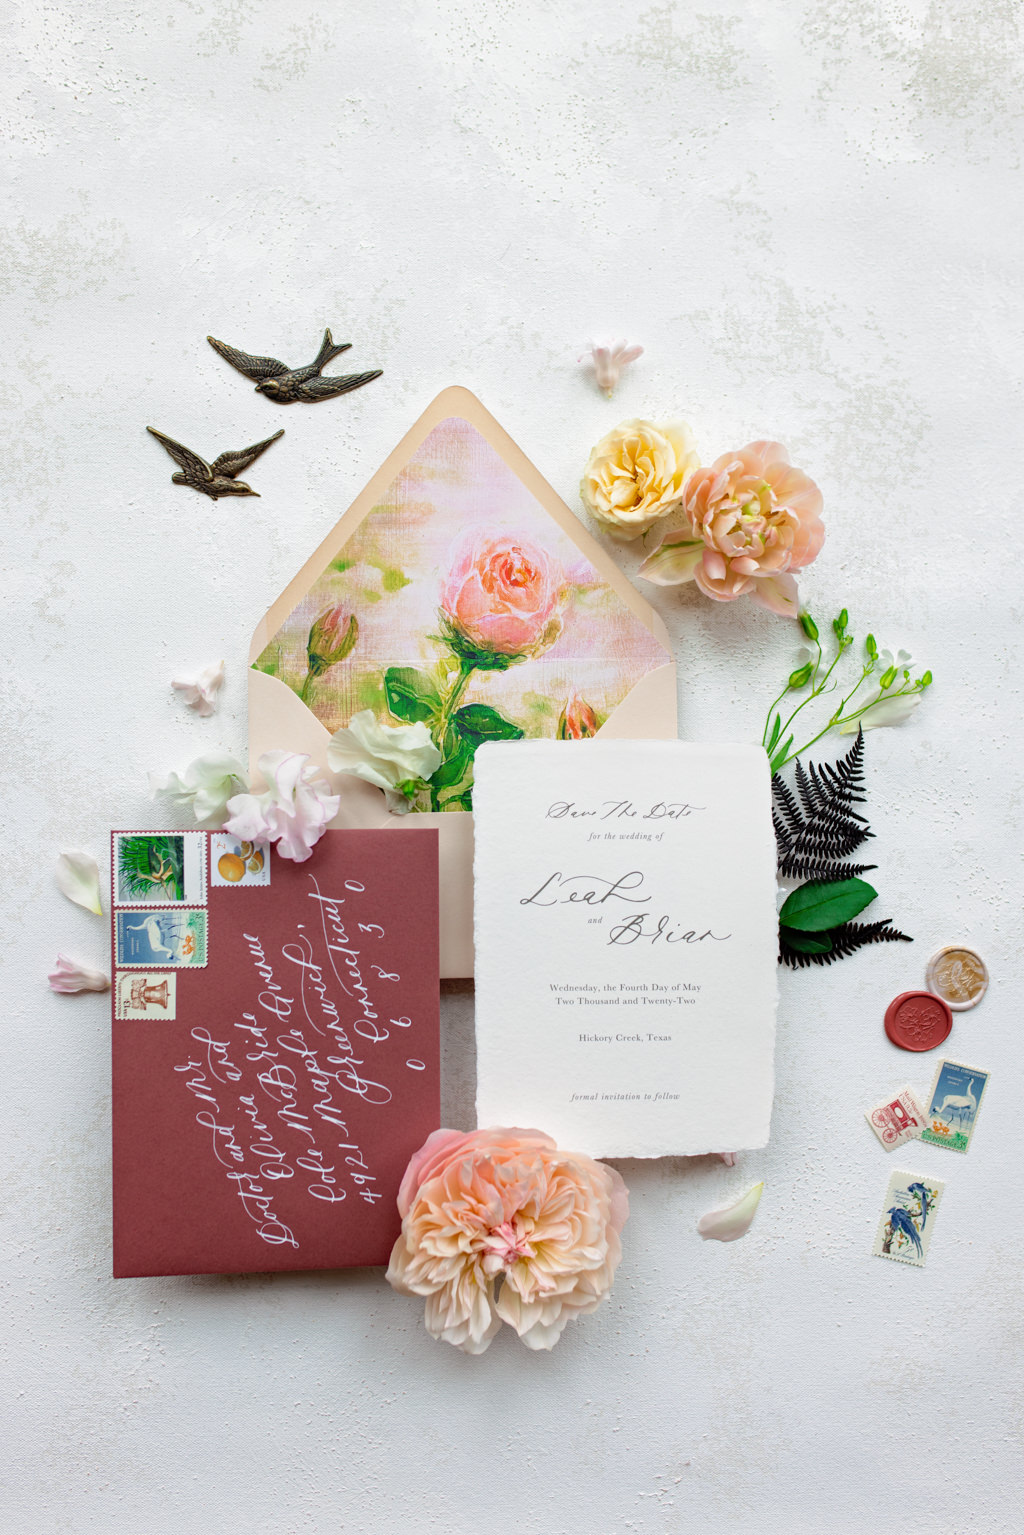 sacramento wedding planners will help you curate the perfect details down to your invitation suite